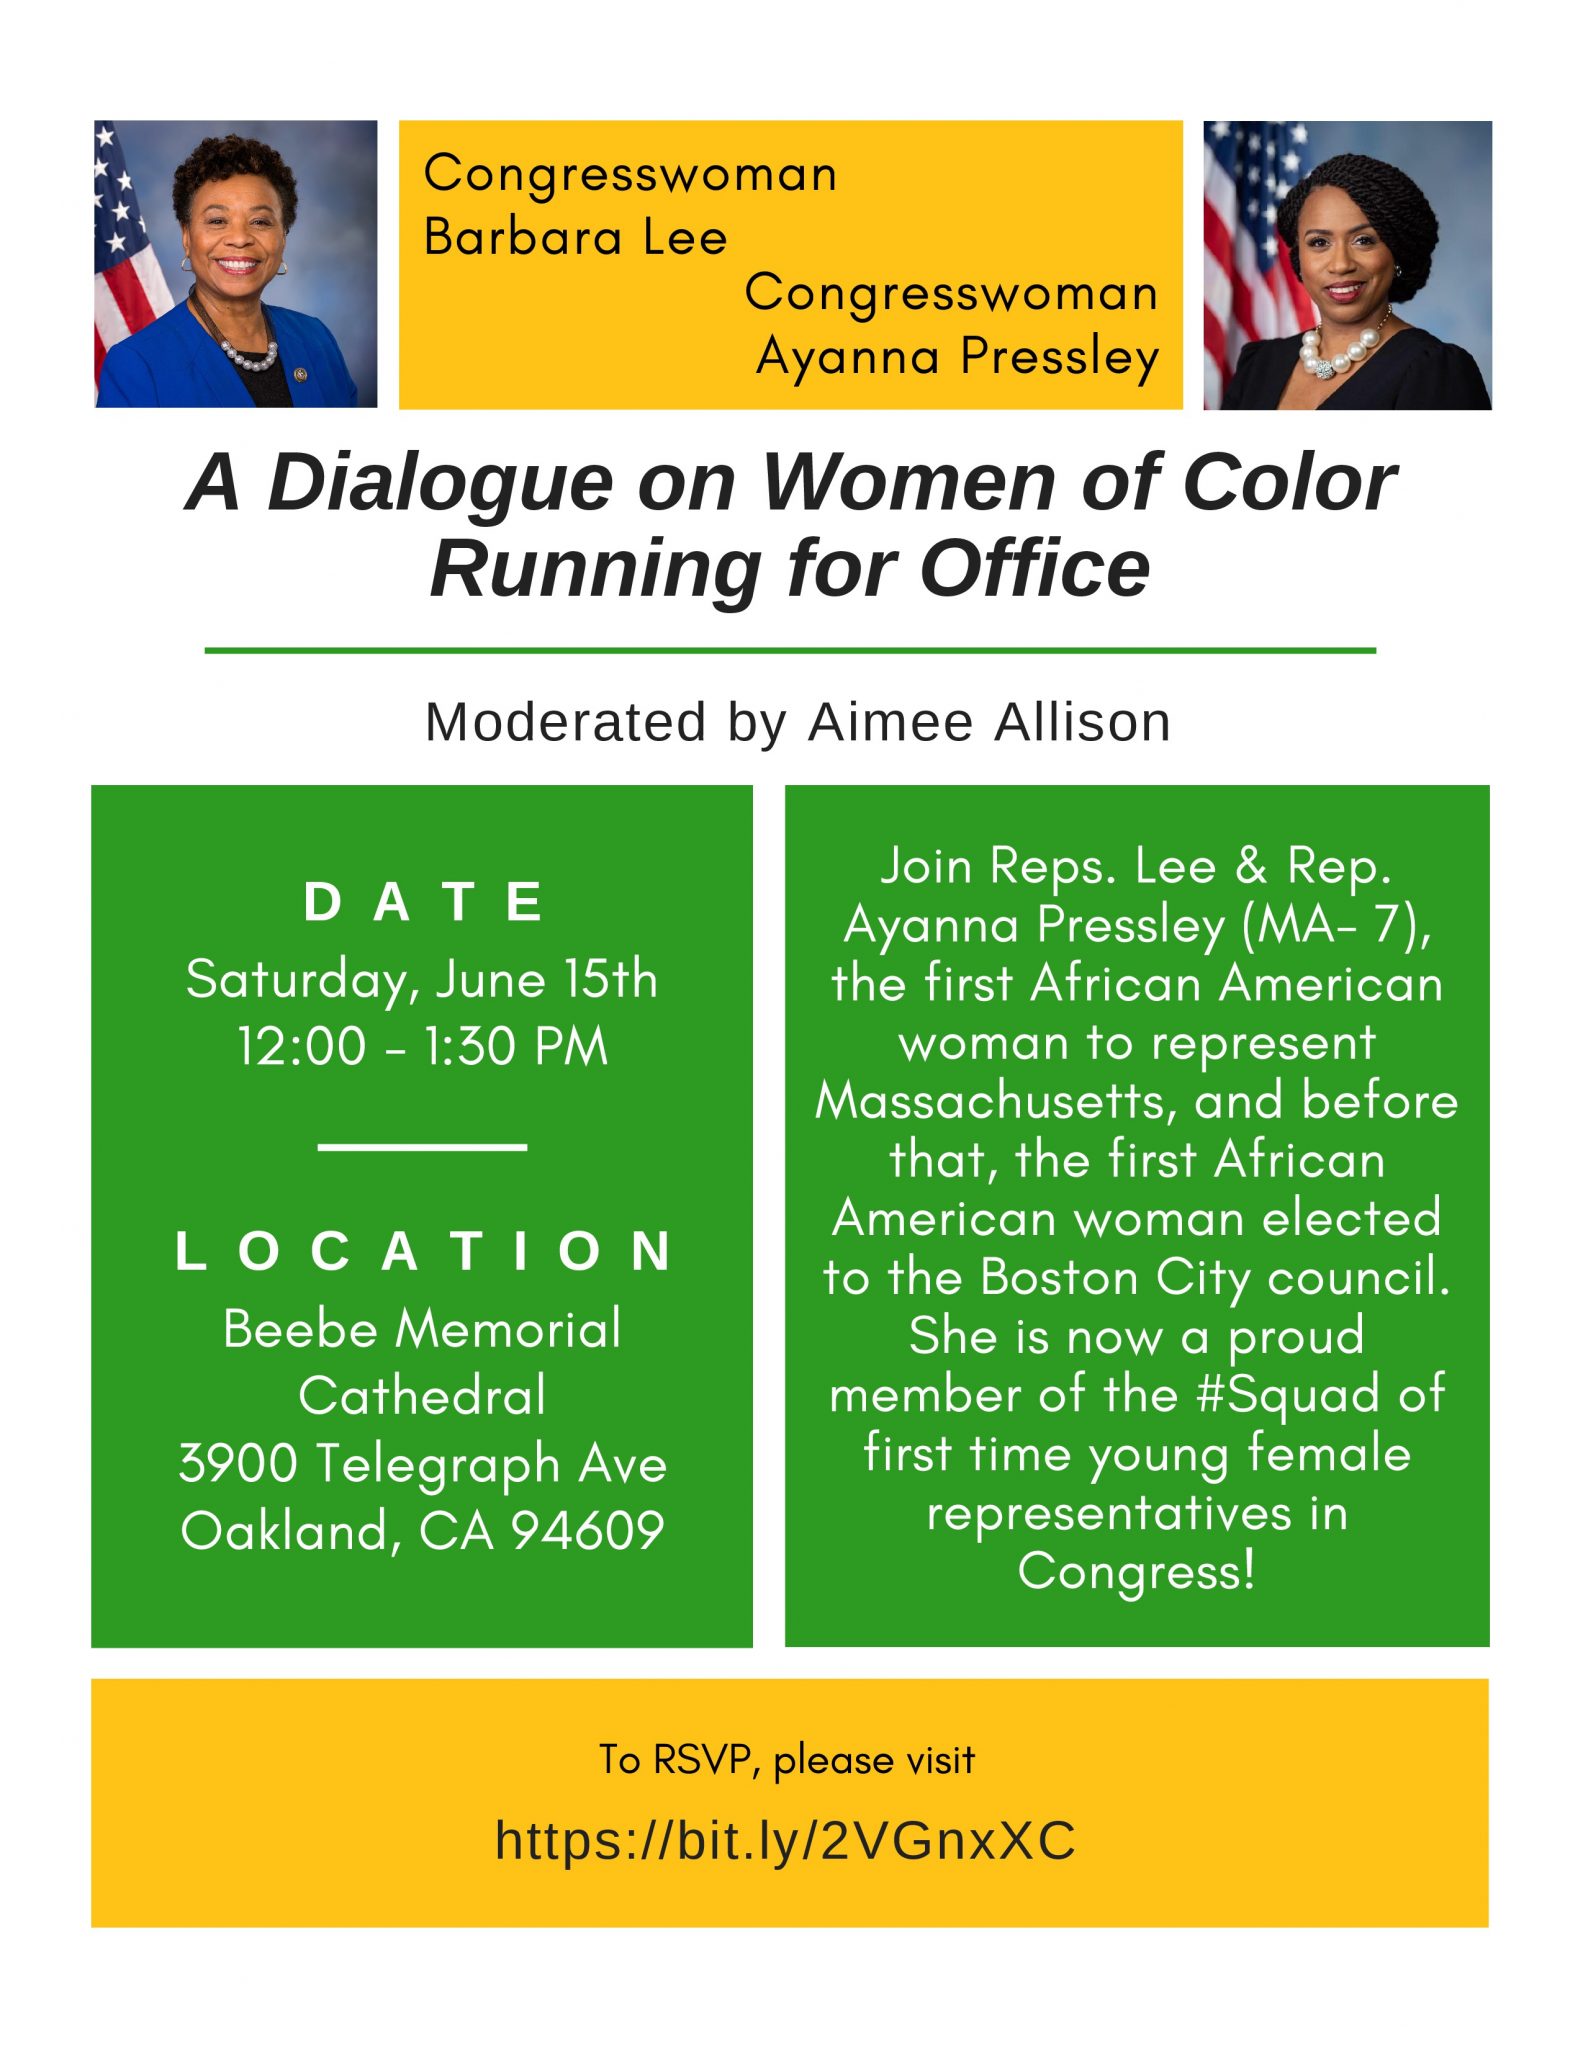 A Dialogue on Women of Color Running for Office Barbara Lee Ayanna Pressley